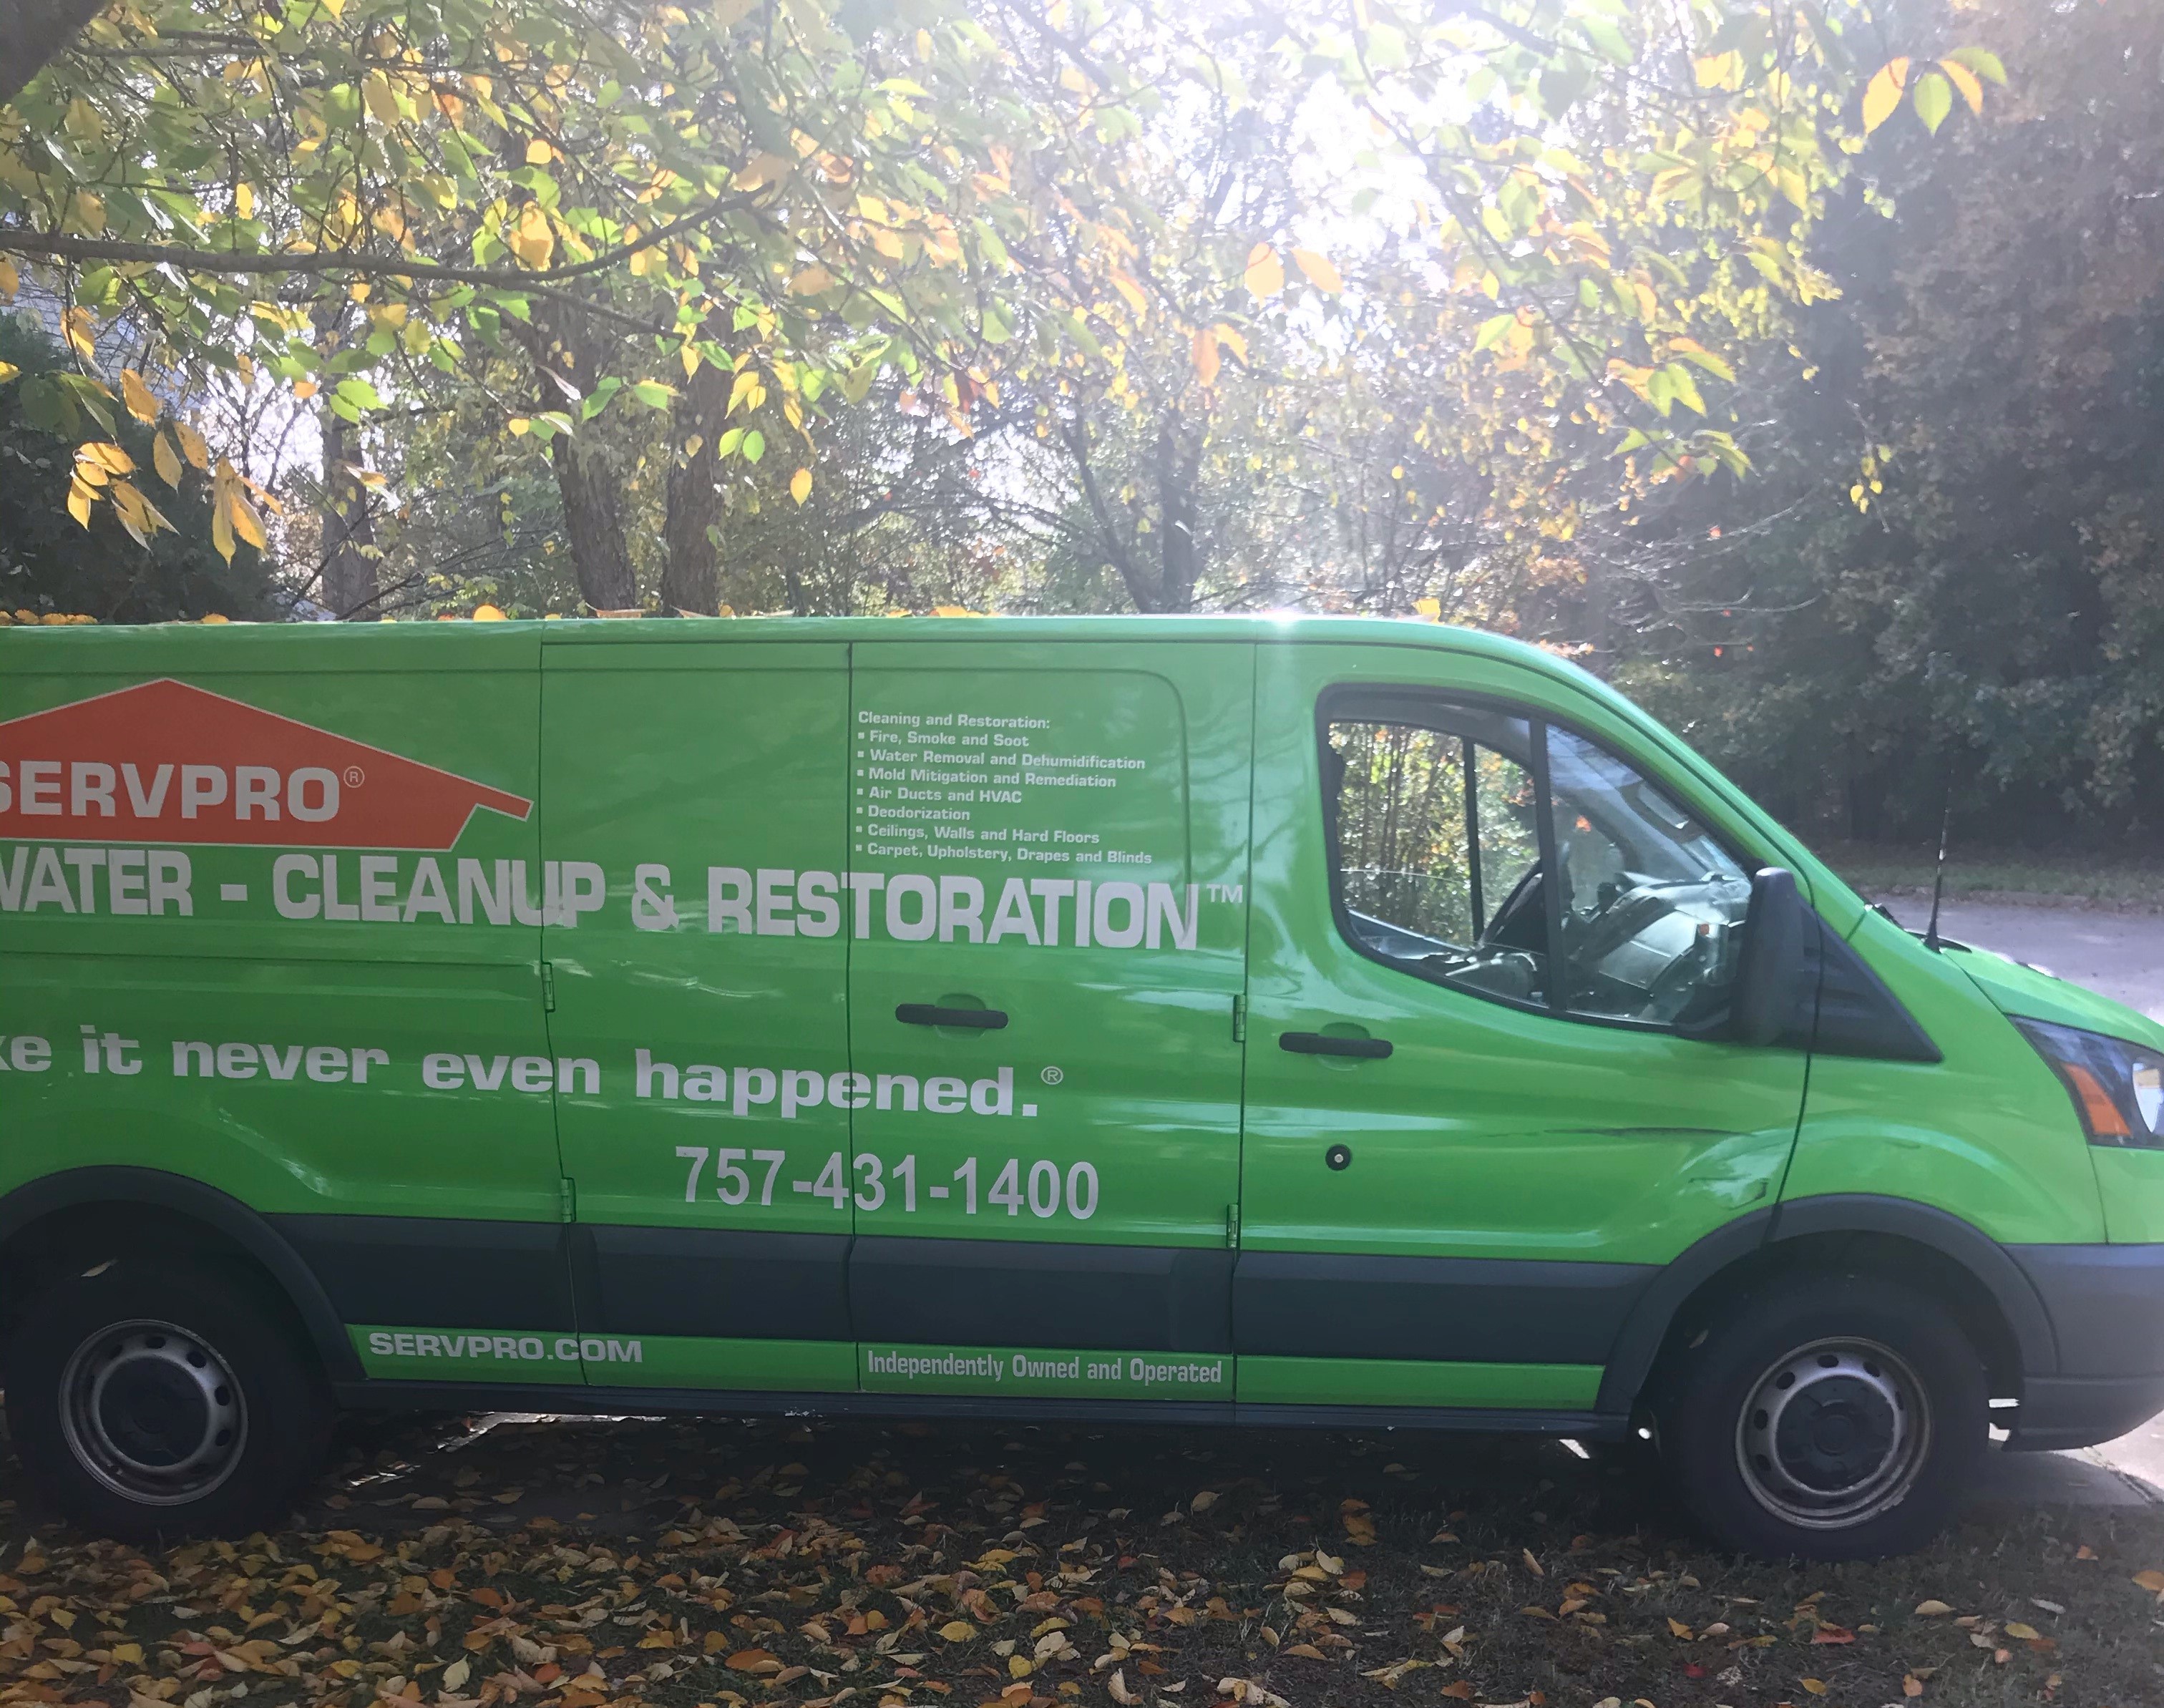 SERVPRO Fire & Water Damage Cleanup and Restoration